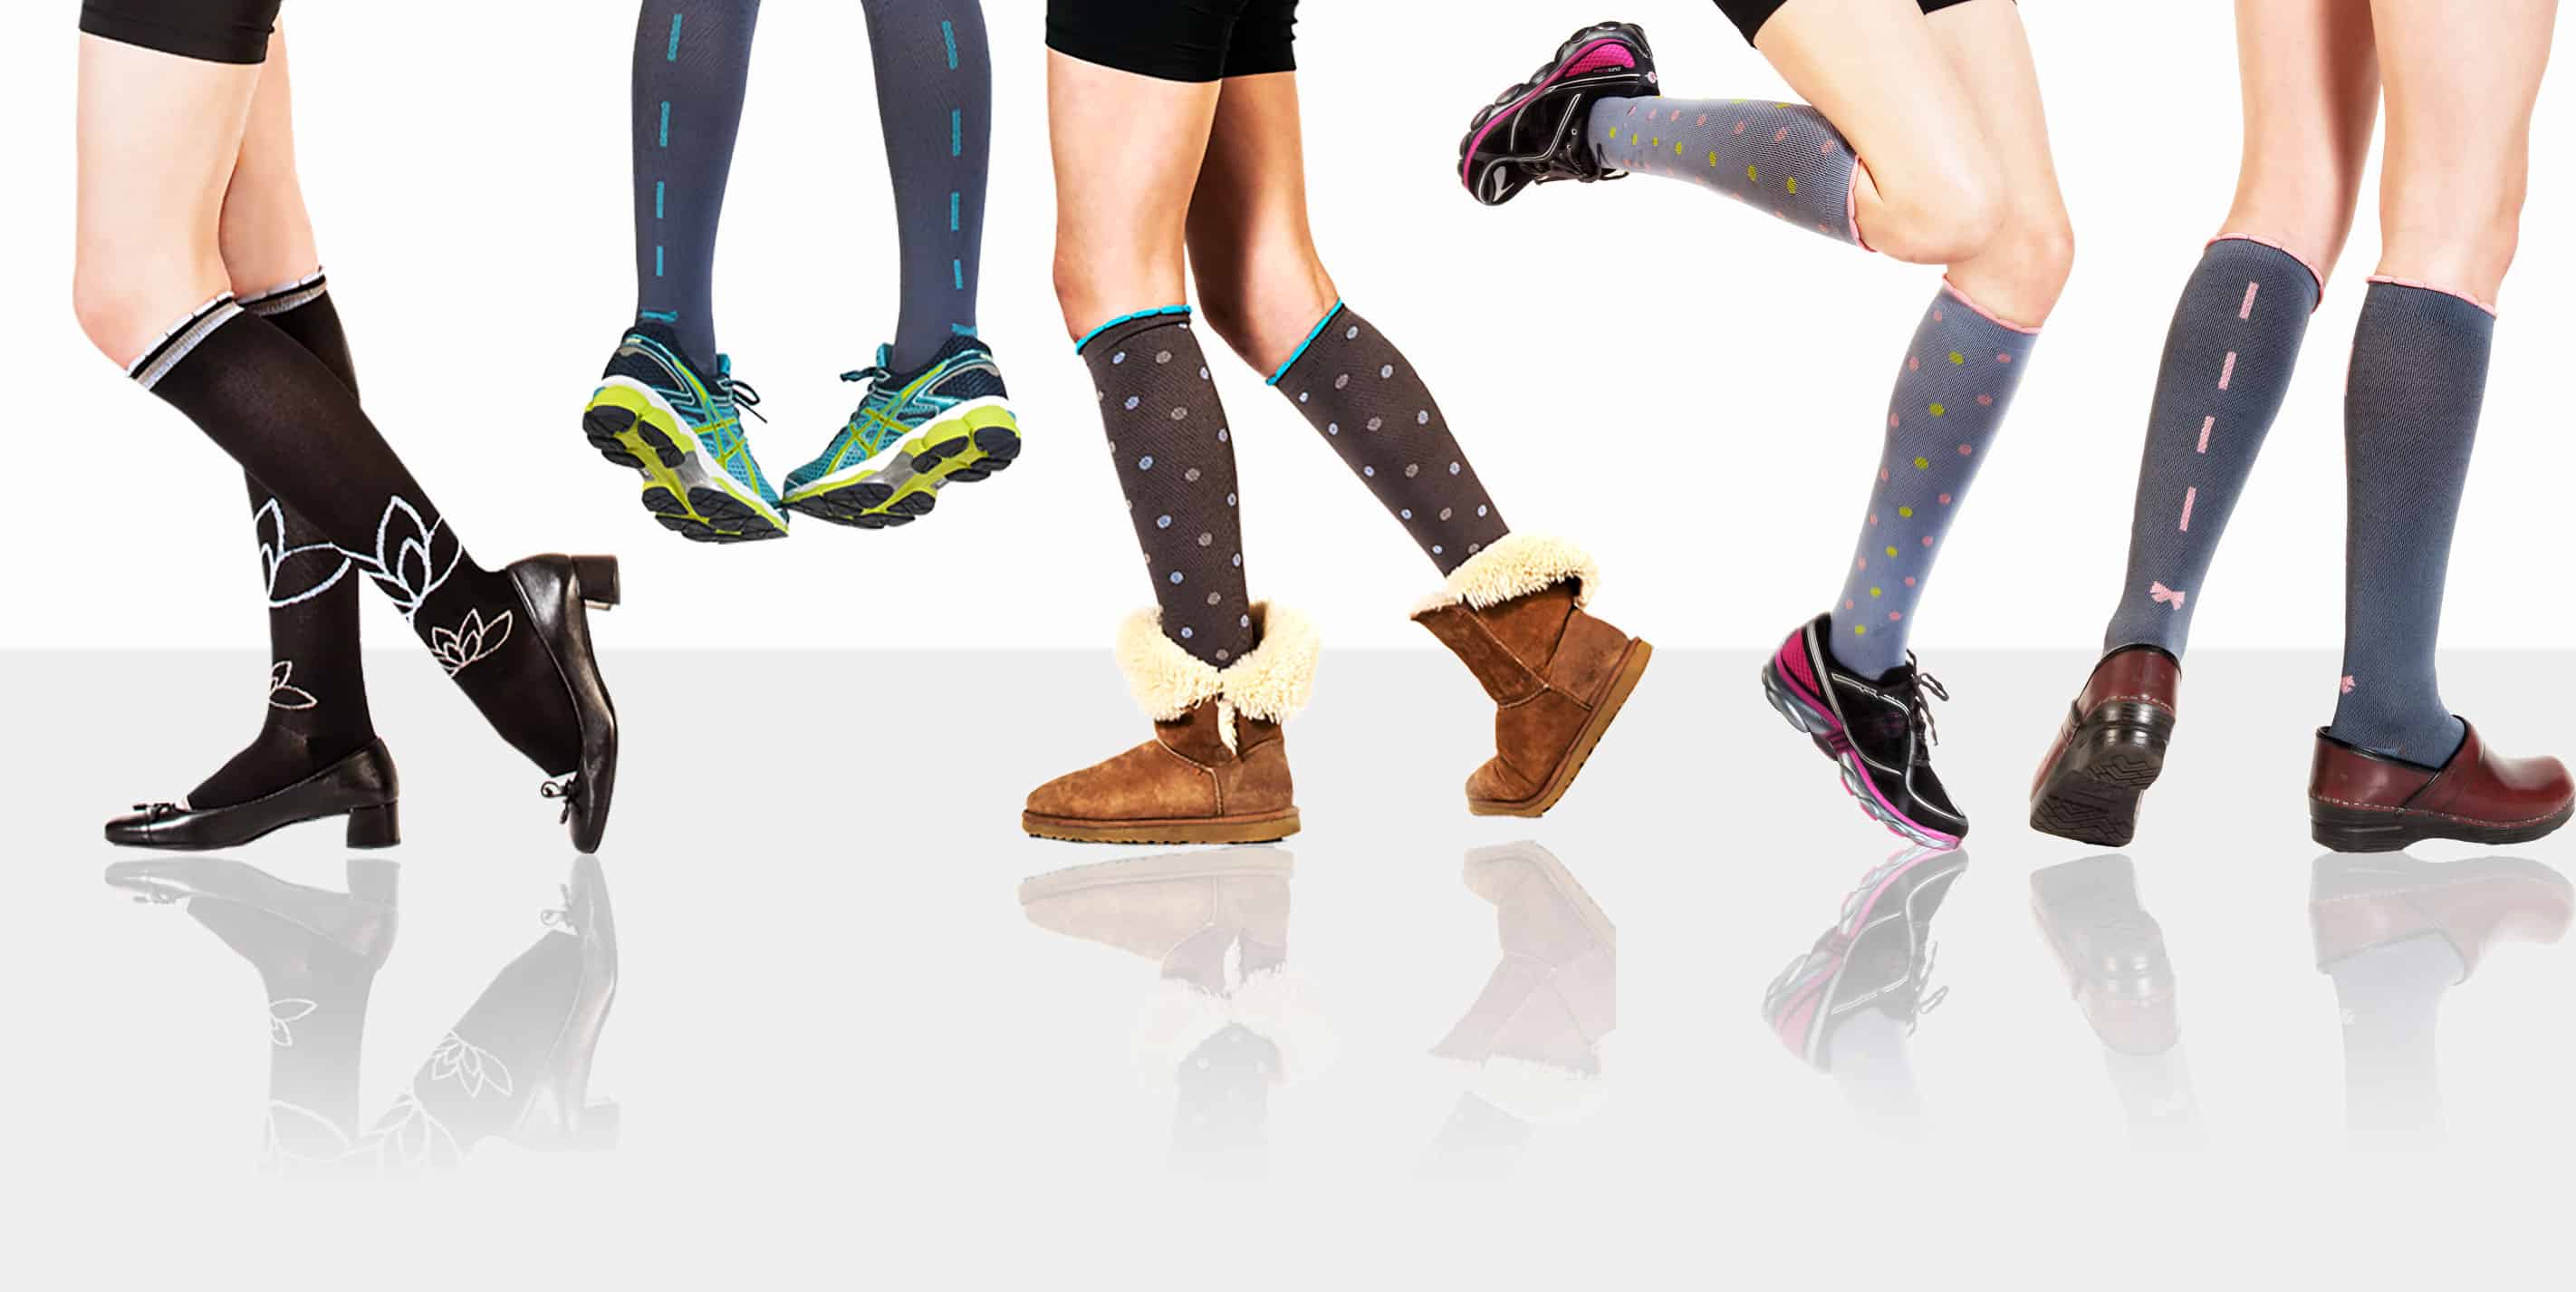 Lily Trotters: Compression Socks That Look Pretty